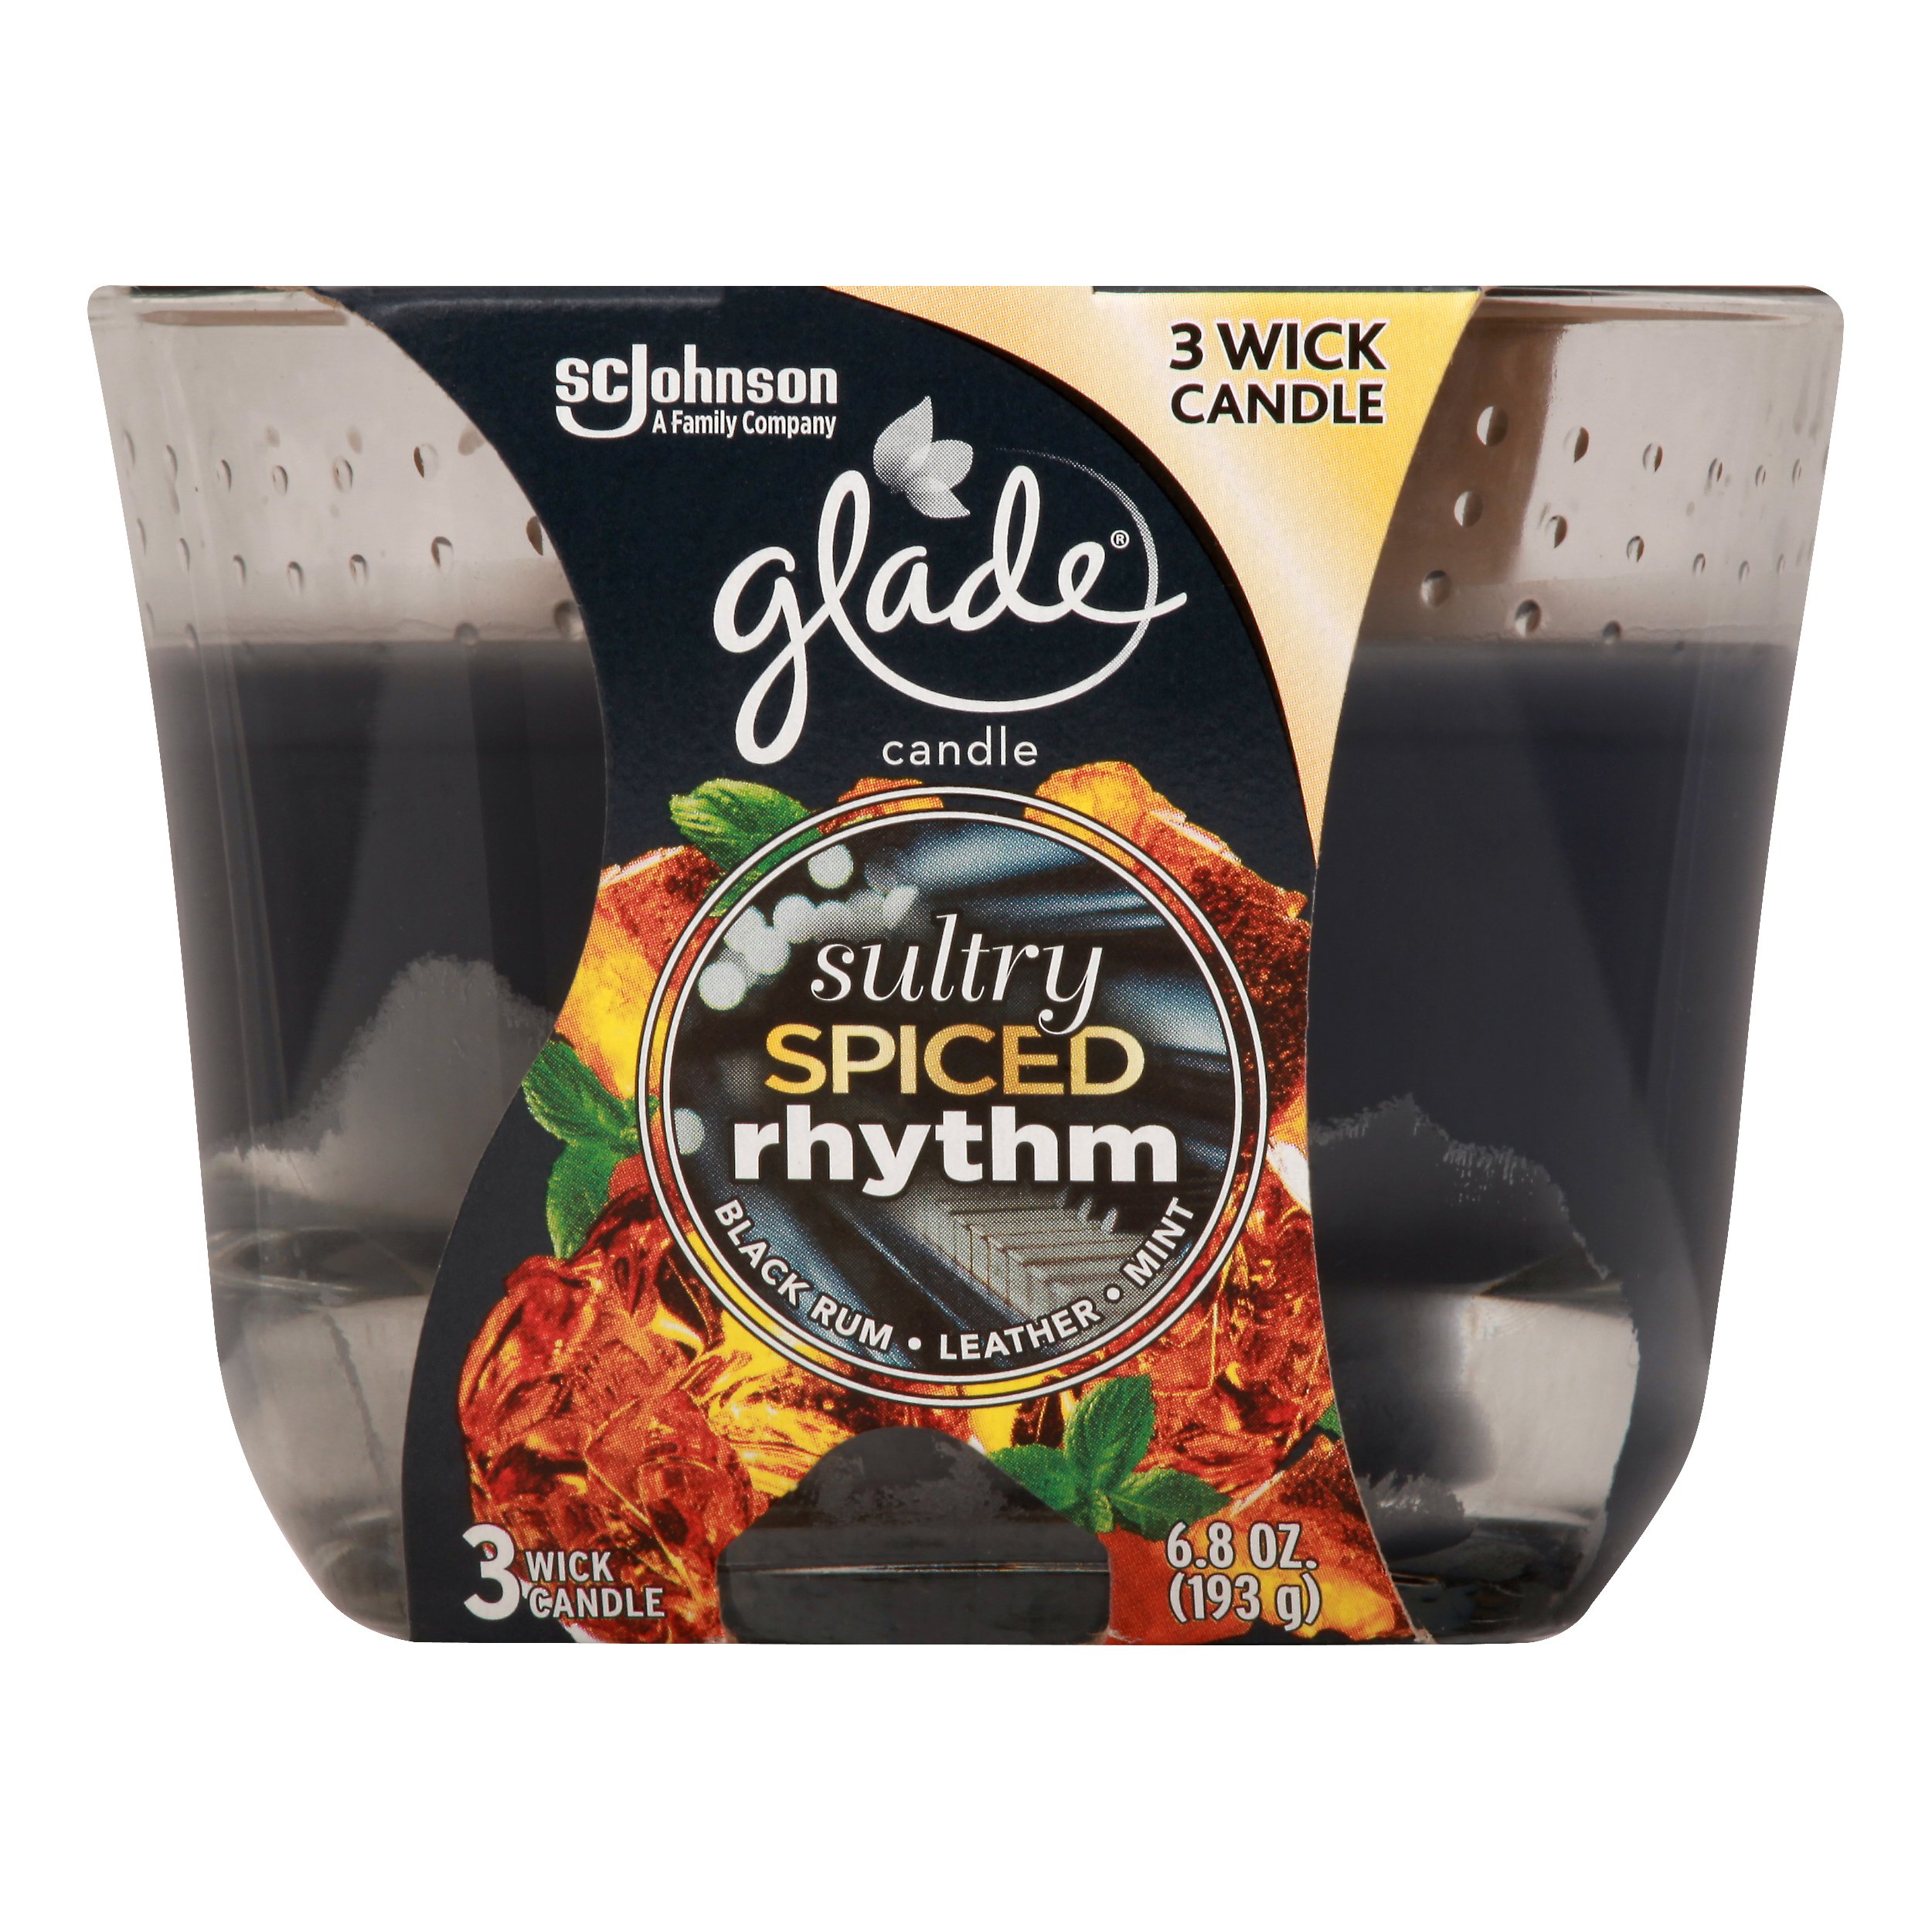 Glade 3 Wick Candle Sultry Amber Rhythm - Shop Candles at H-E-B